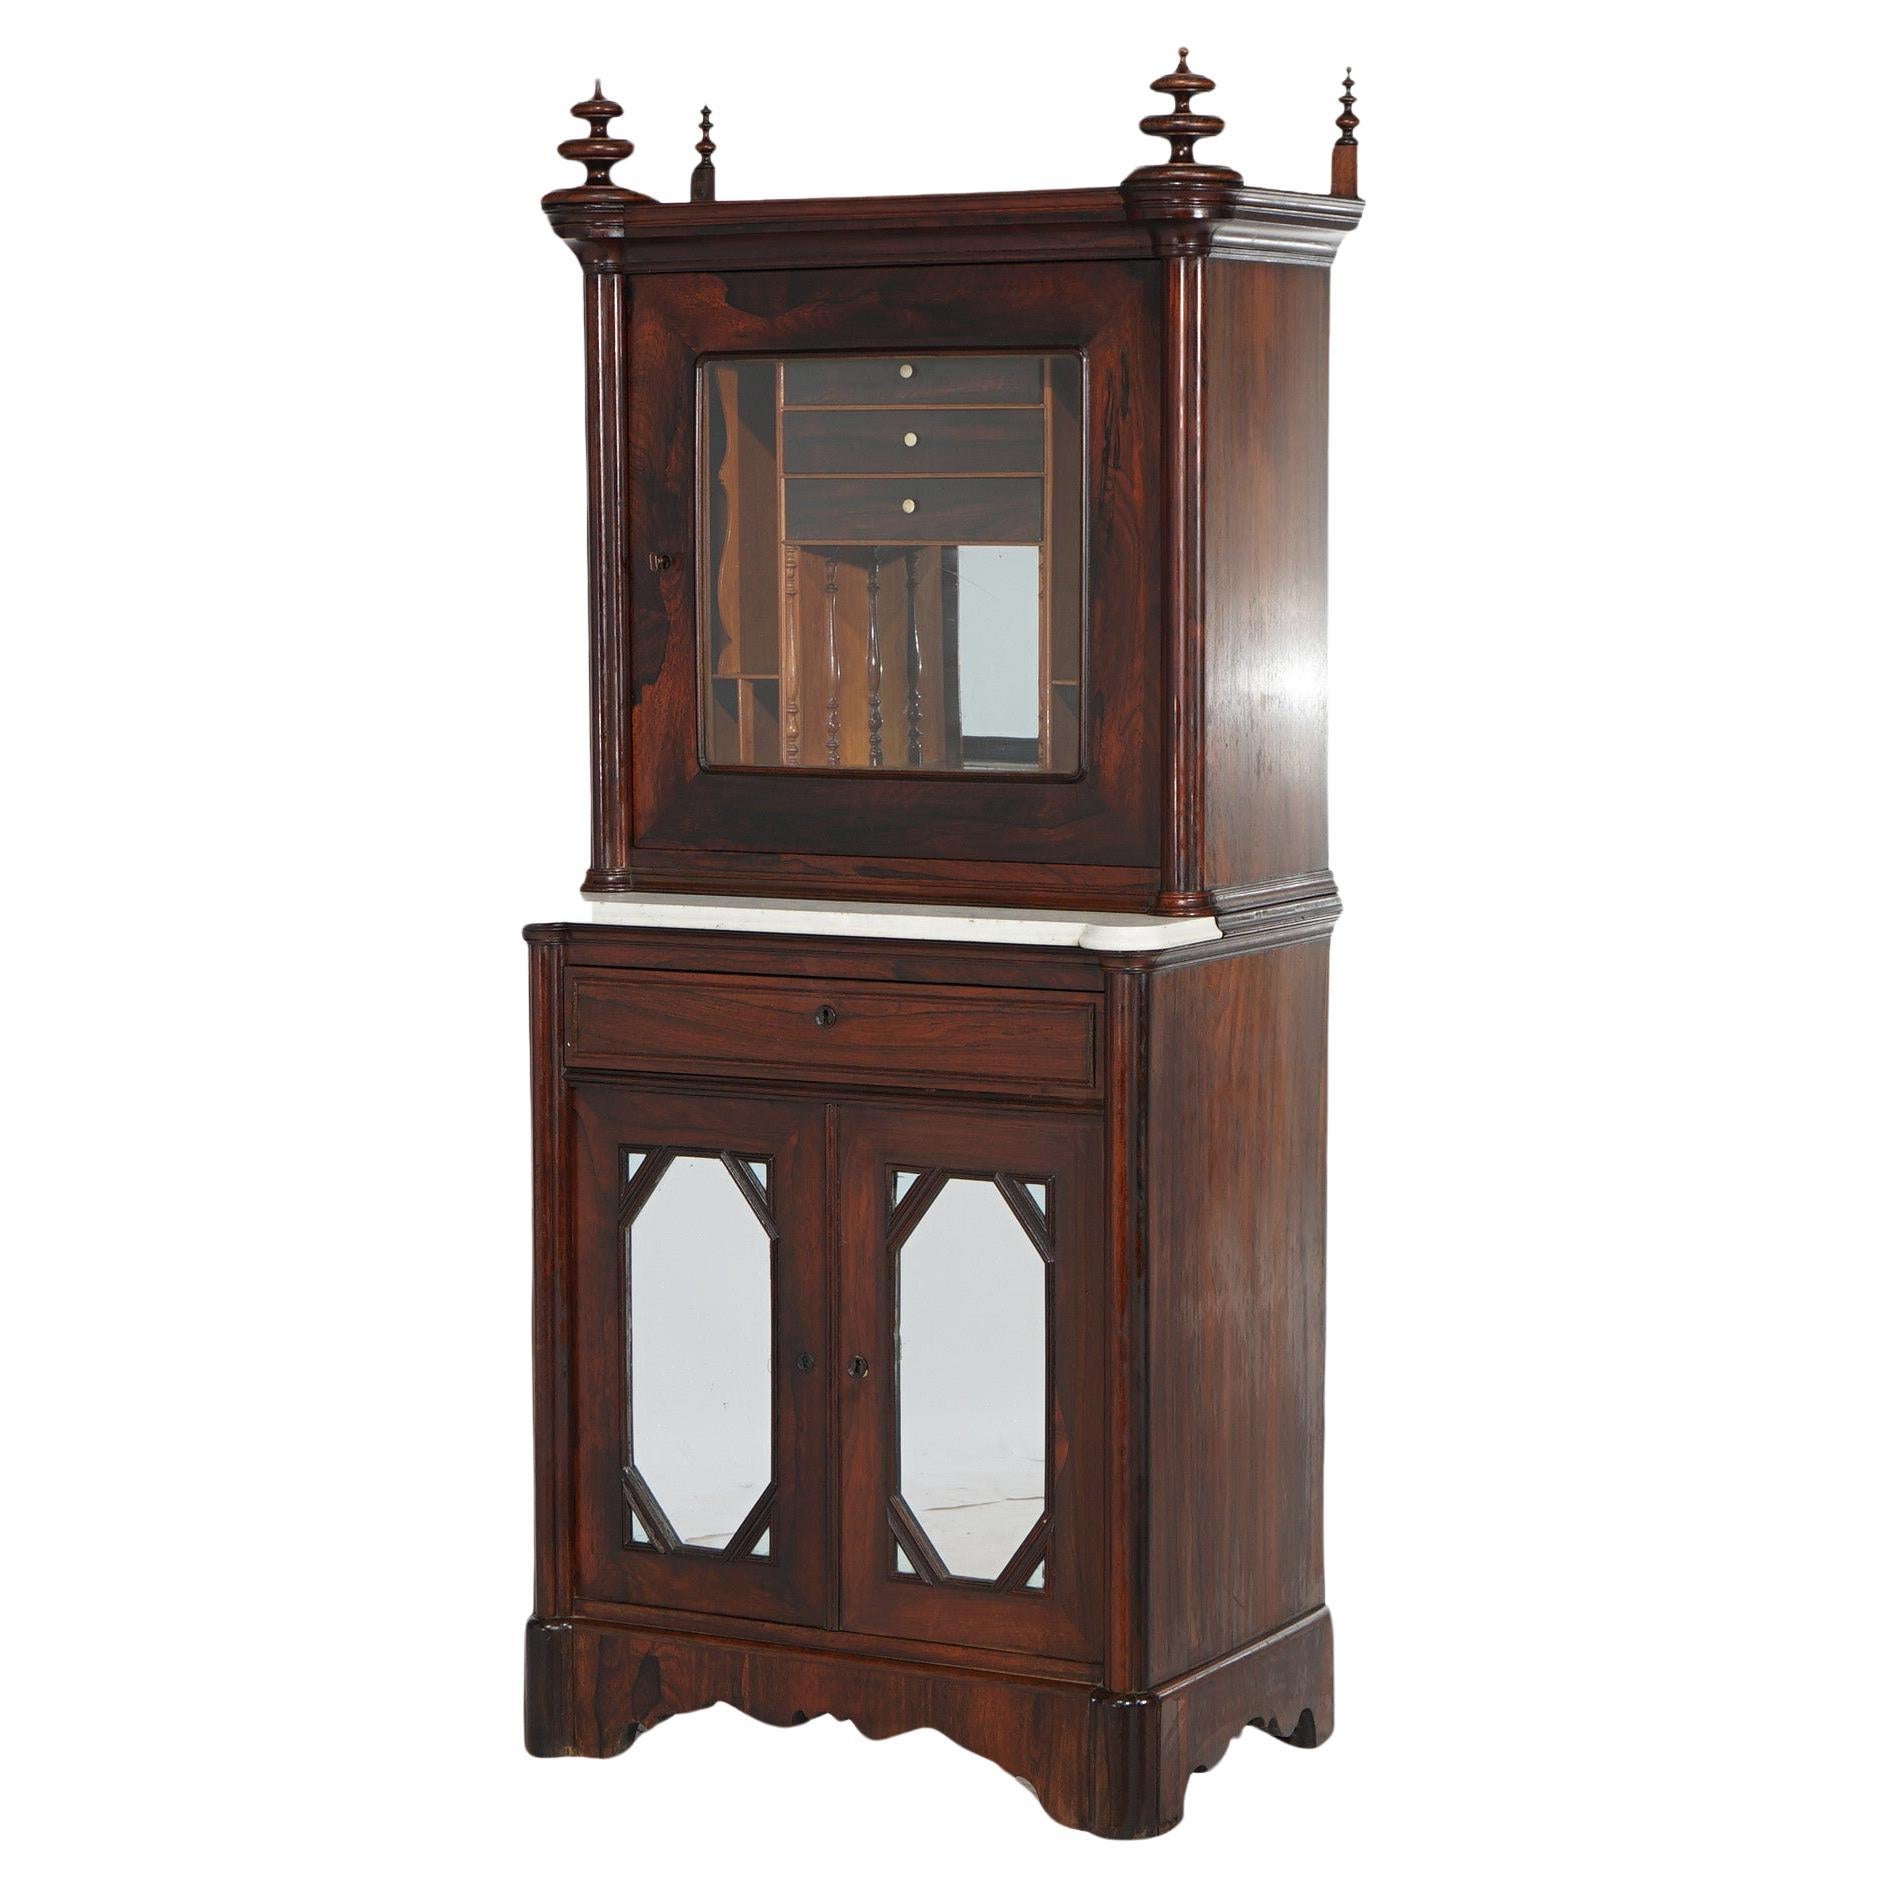 Antique Gothic Revival Victorian Rosewood & Marble Mirrored Secretary Desk C1850 For Sale